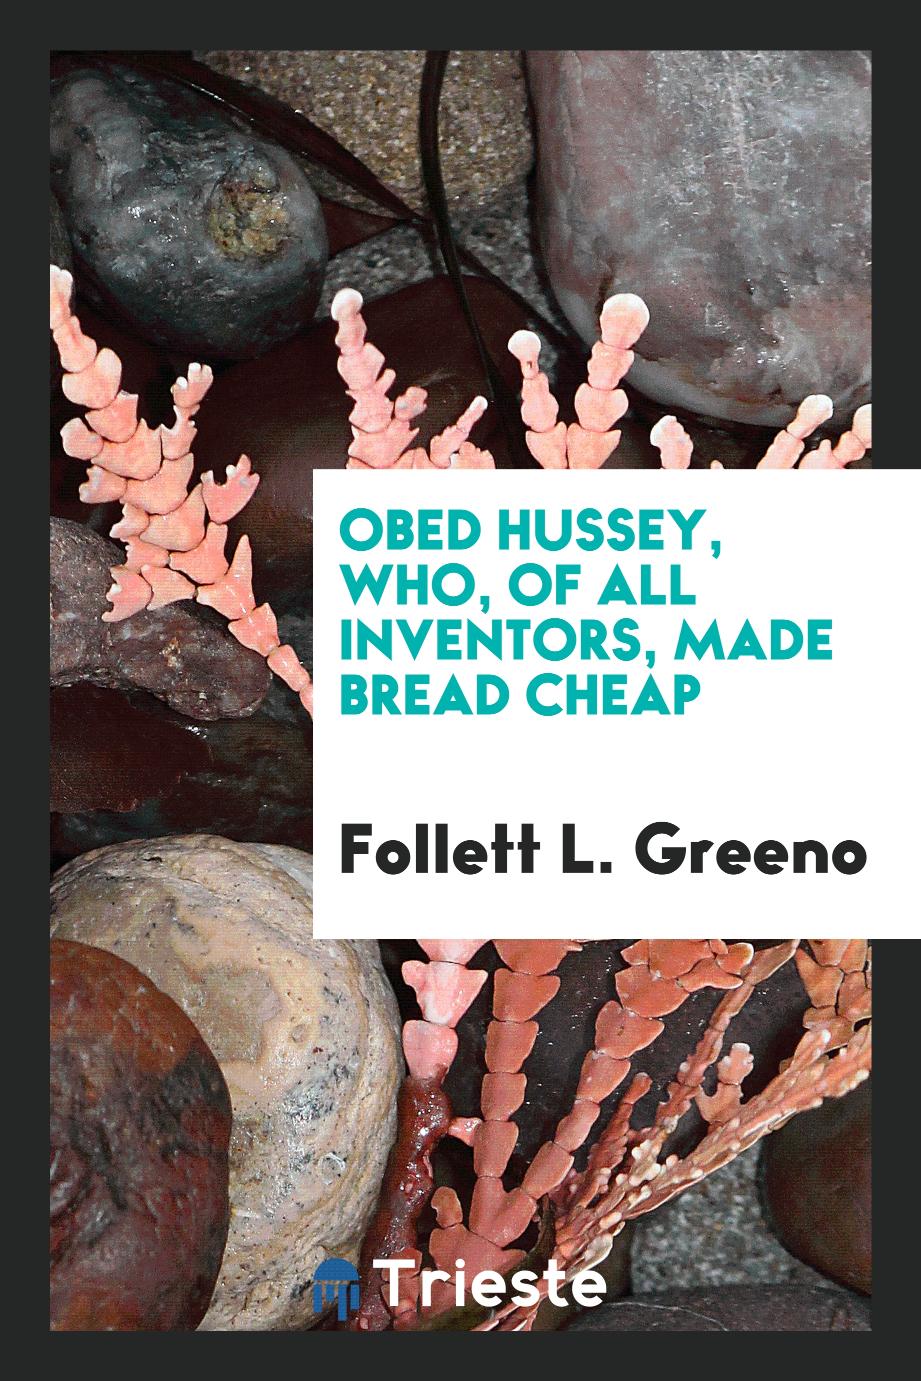 Obed Hussey, who, of all inventors, made bread cheap